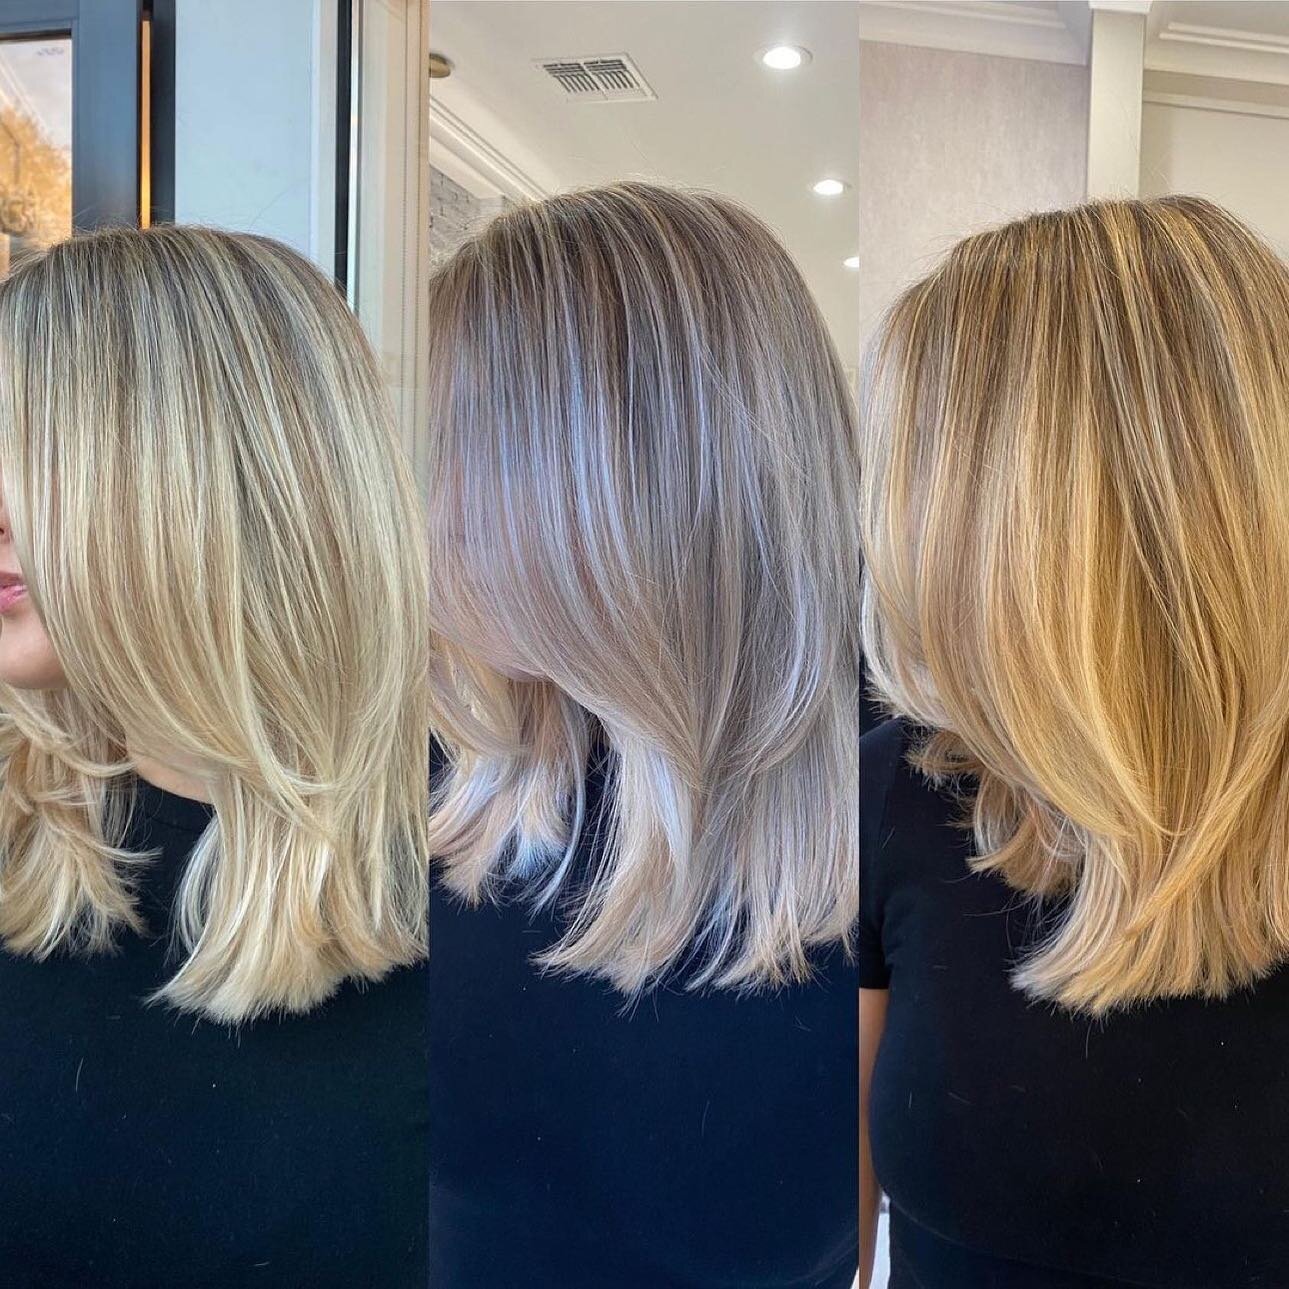 Reserve an appointment with our blonde specialist Nikki  @hairbynikkicantrell #elanhairartist 
&bull;
Same client, Different lighting.  NO filters on this just different areas of light! LIGHTING IS KEY🔑 🔑🔑🔑🔑
#springlakenj #monmouthcountynj #njsa